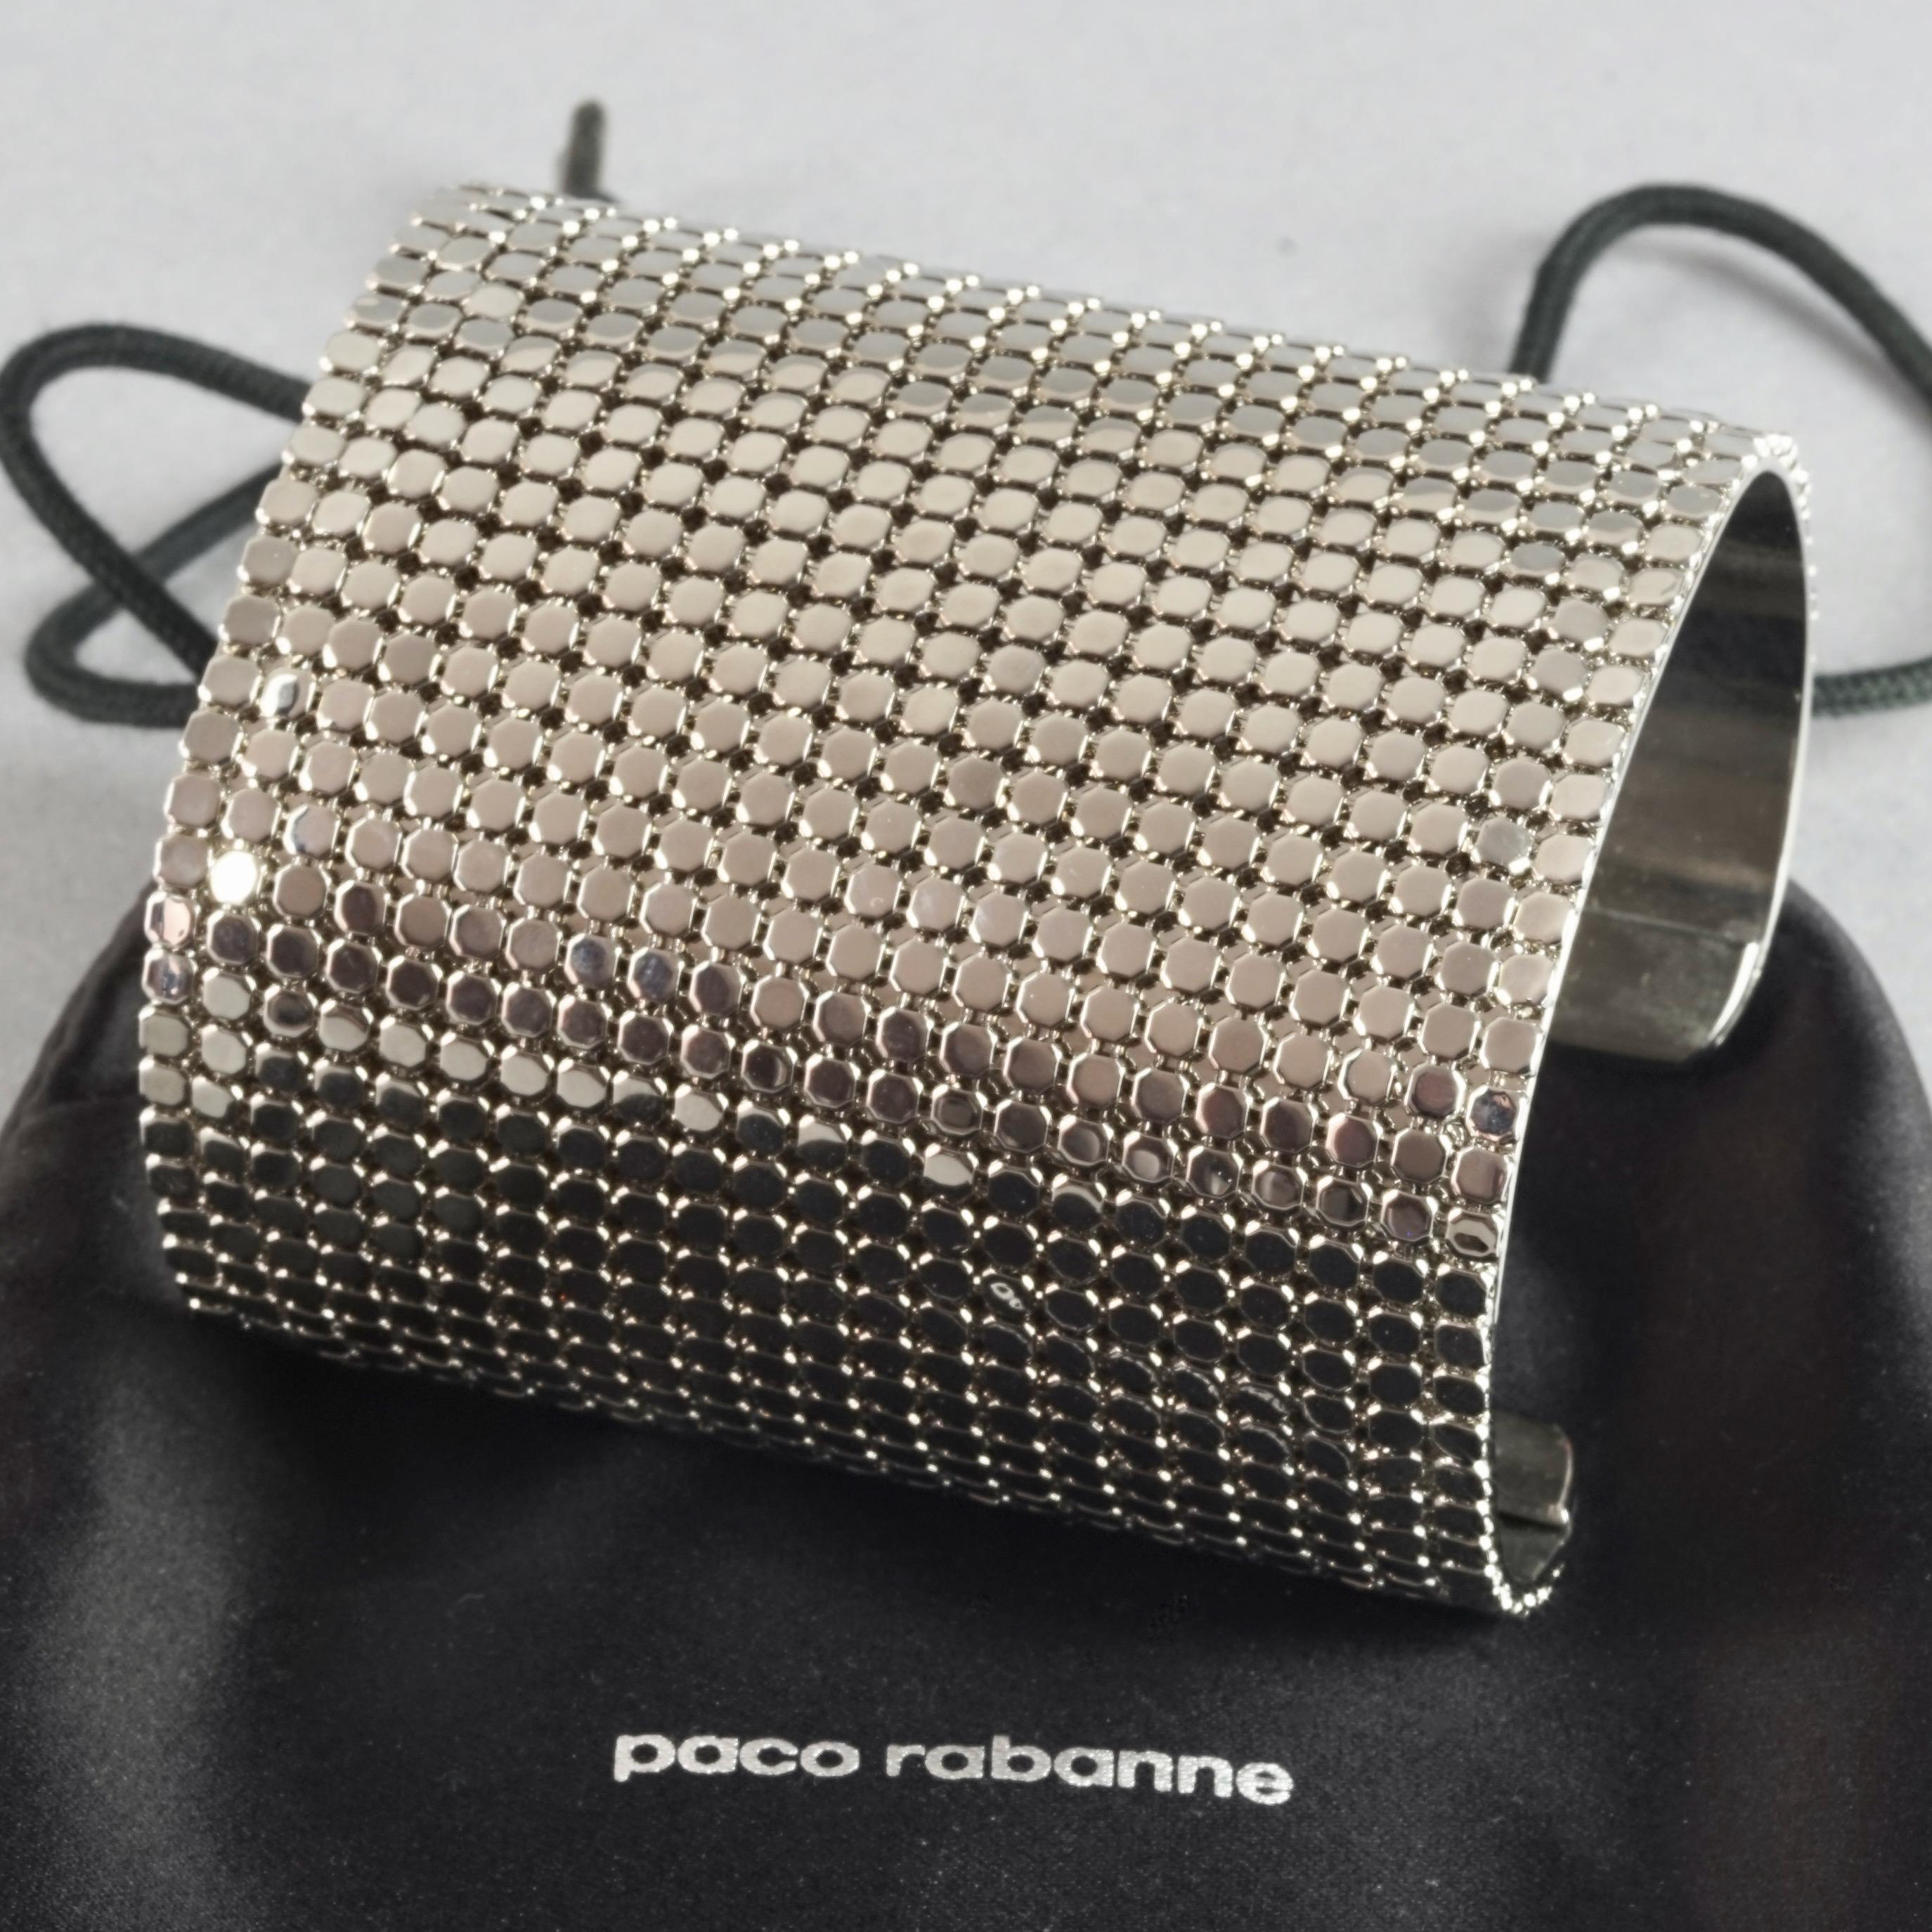 Vintage PACO RABANNE Disco Mesh Cuff Bracelet 	

Measurements:
Height: 2.75 inches (7 cm)
Length: 6.53 inches (16.6 cm) including opening

Features:
- 100% Authentic PACO RABANNE.
- Metal disco mesh wide cuff bracelet.
- Signed PACO RABANNE.
-